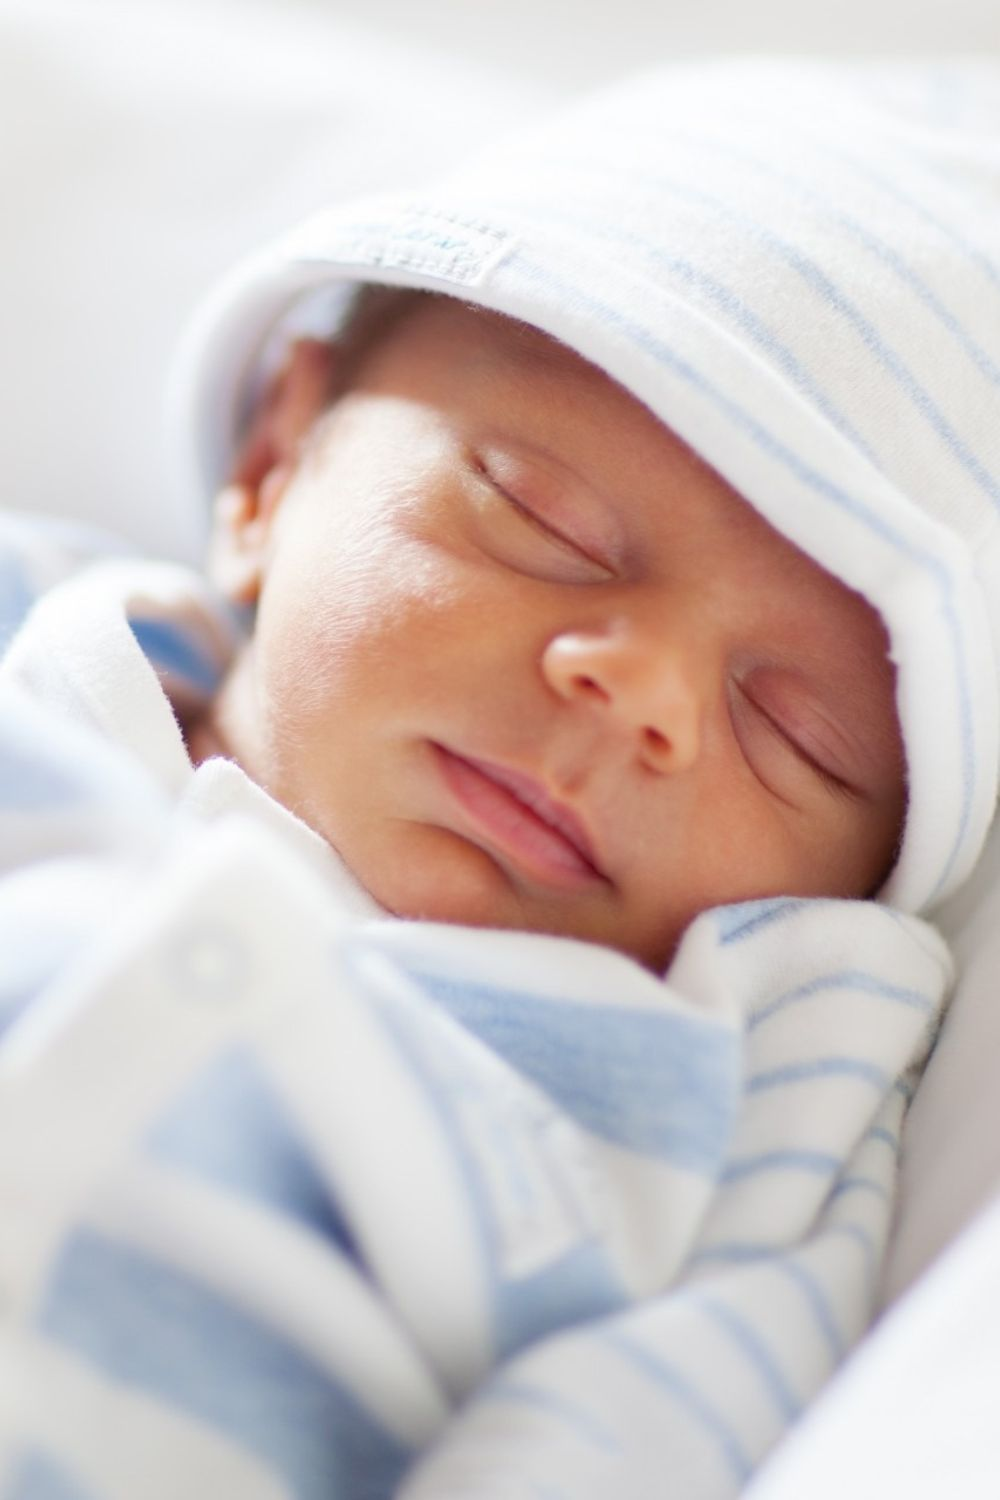 Newborn sleeping - Featured In Tips to Prevent Baby Scratches